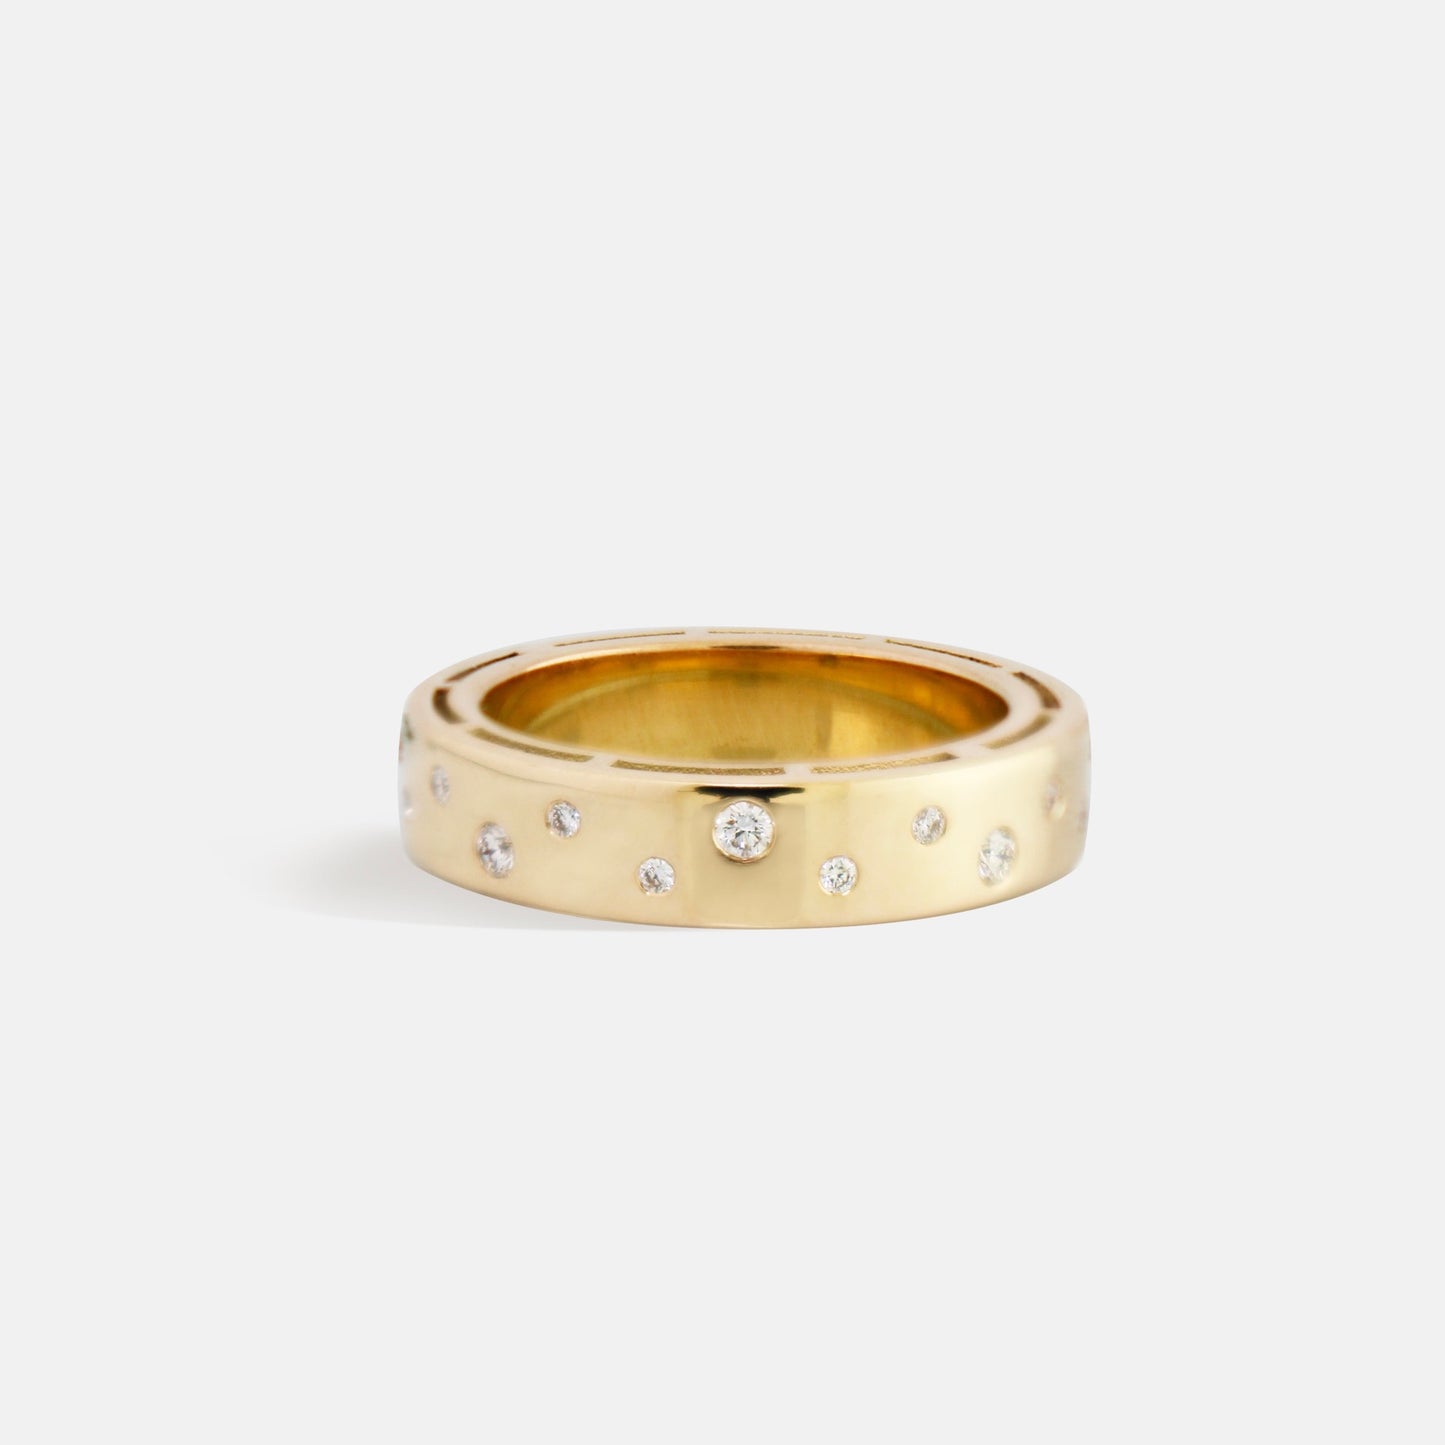 Milky Way Ring in Gold and diamonds